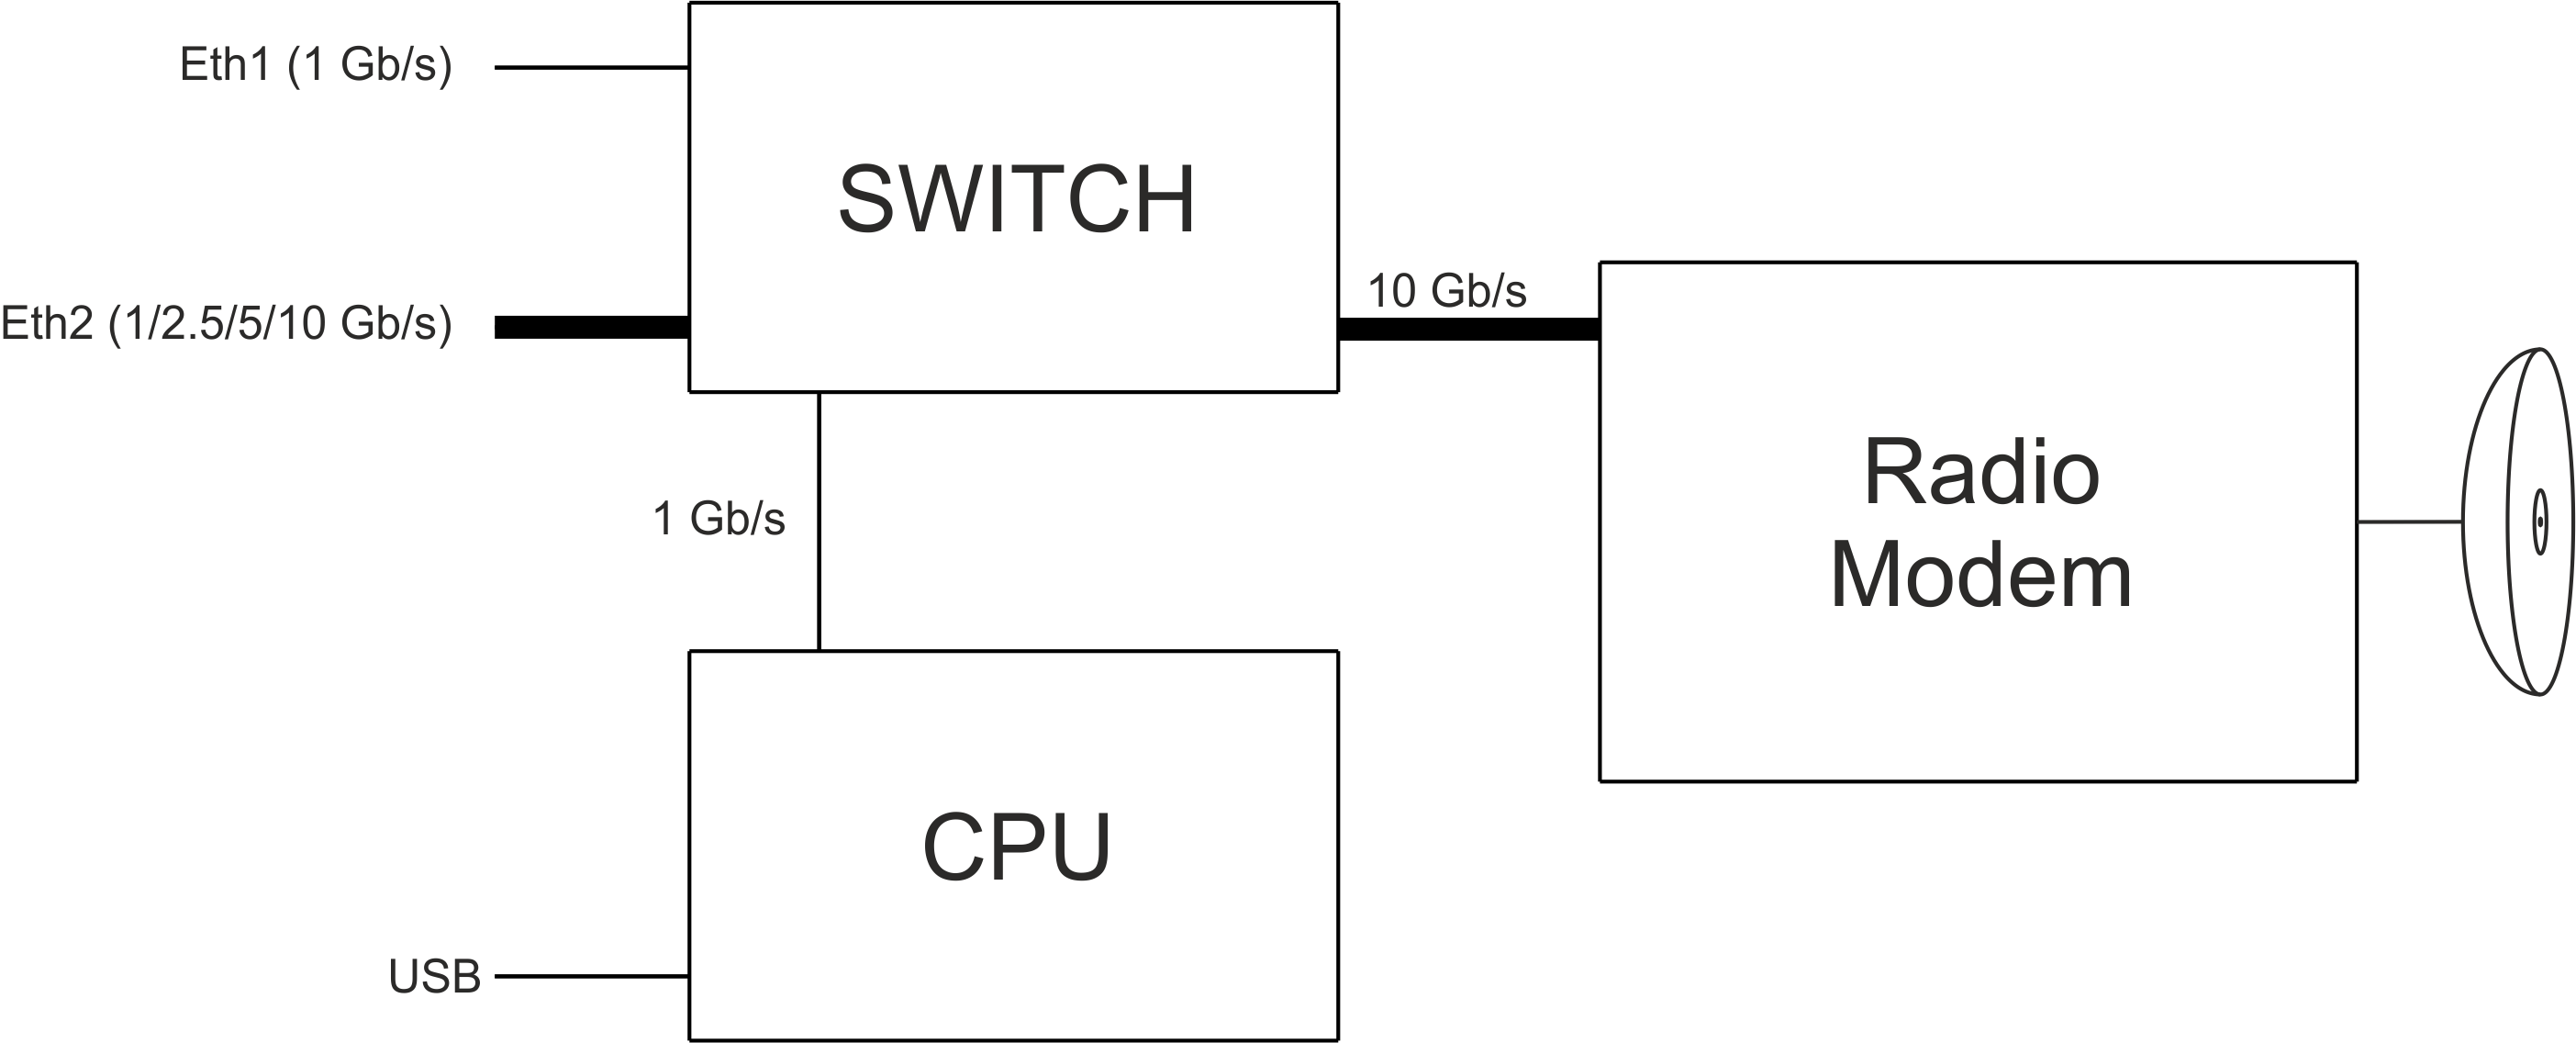 Block diagram of the unit with 1 + 10 Gb/s Eth inputs